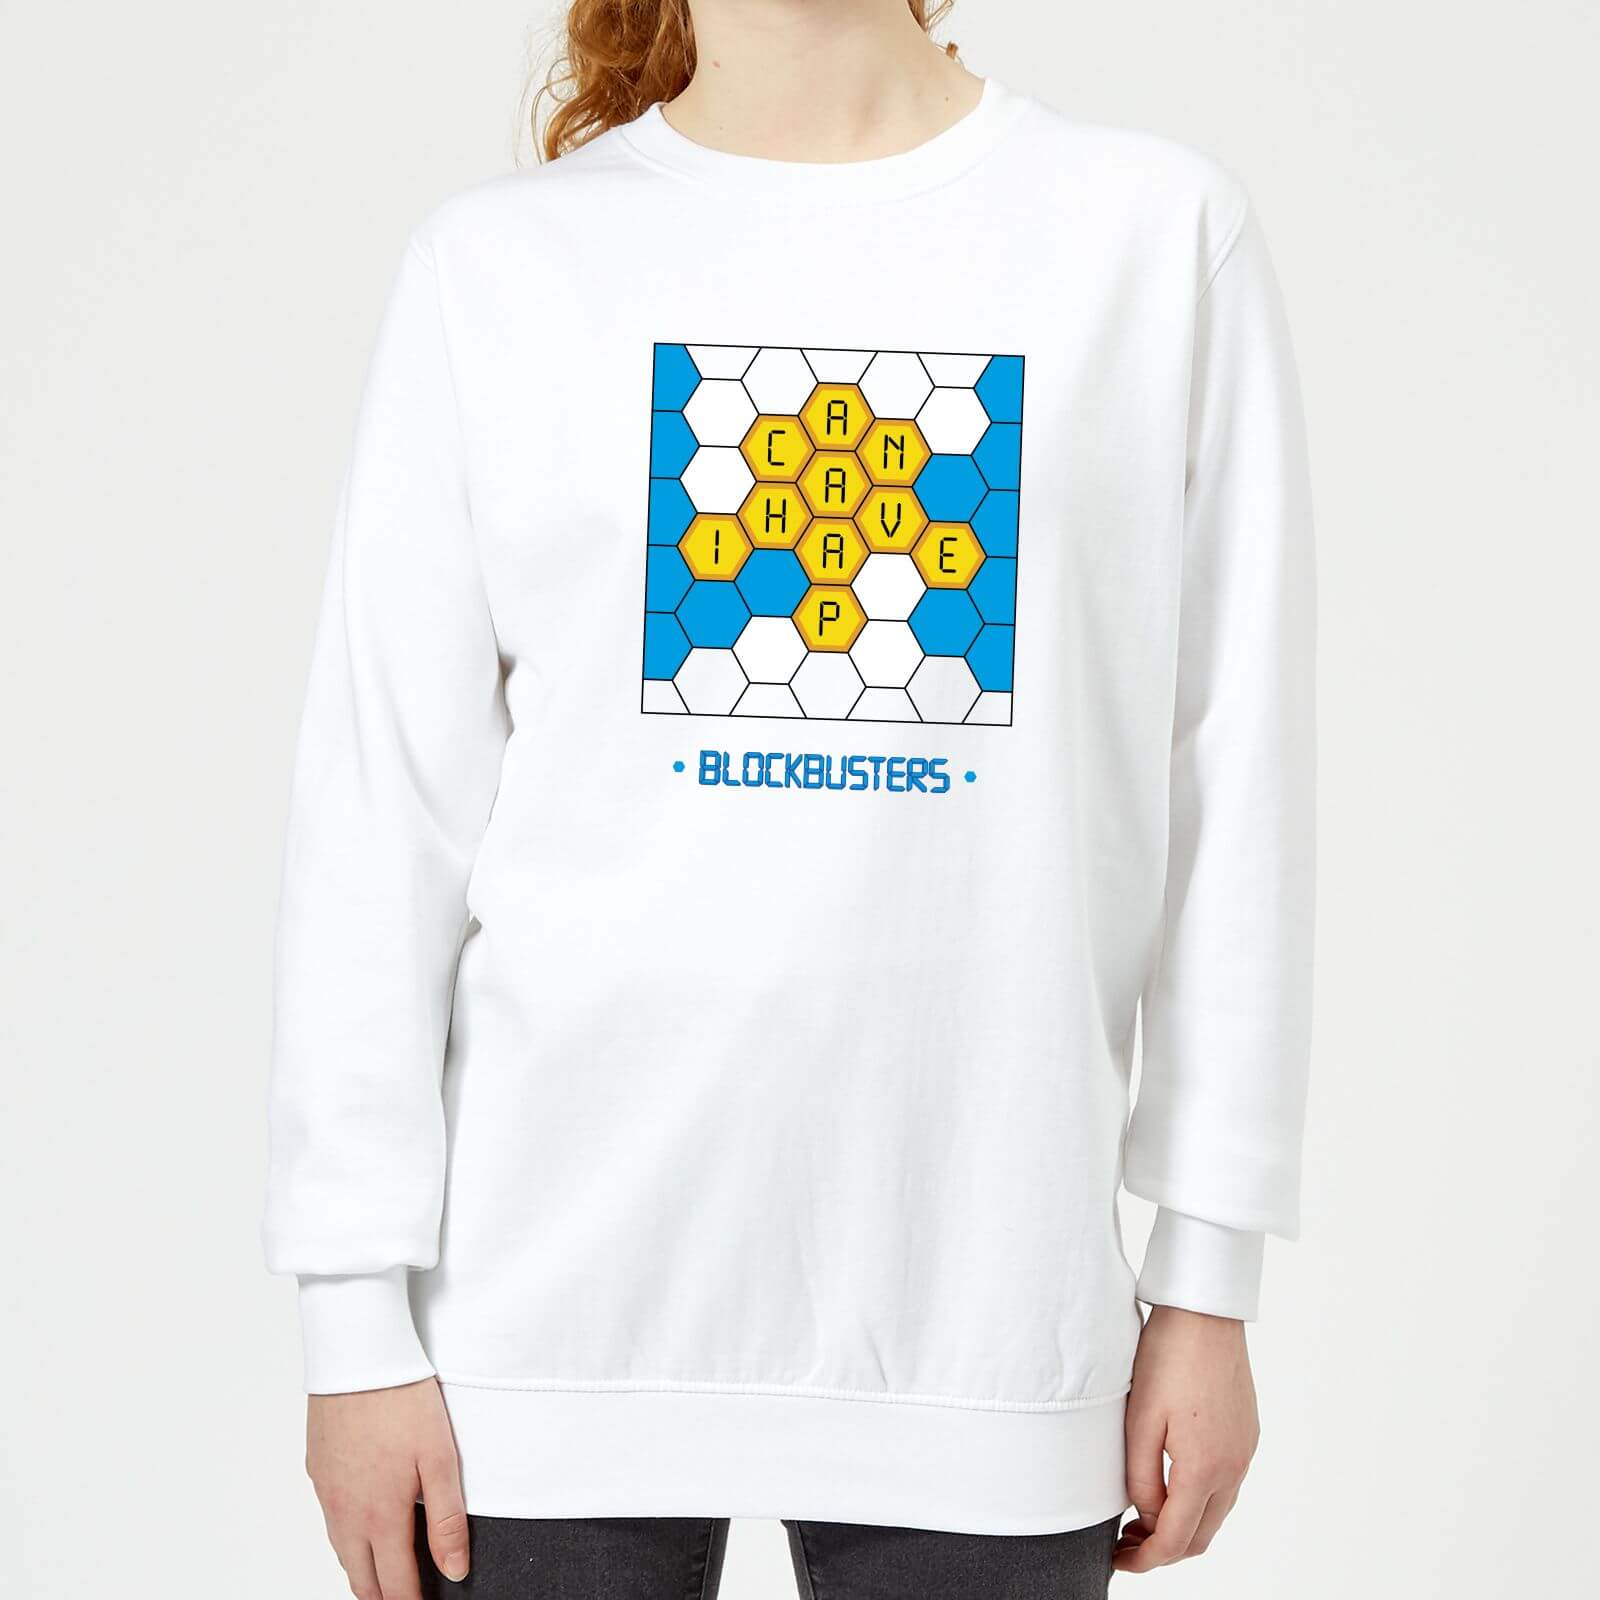 Blockbusters Can I Have A 'P' Women's Sweatshirt - White - XS - White